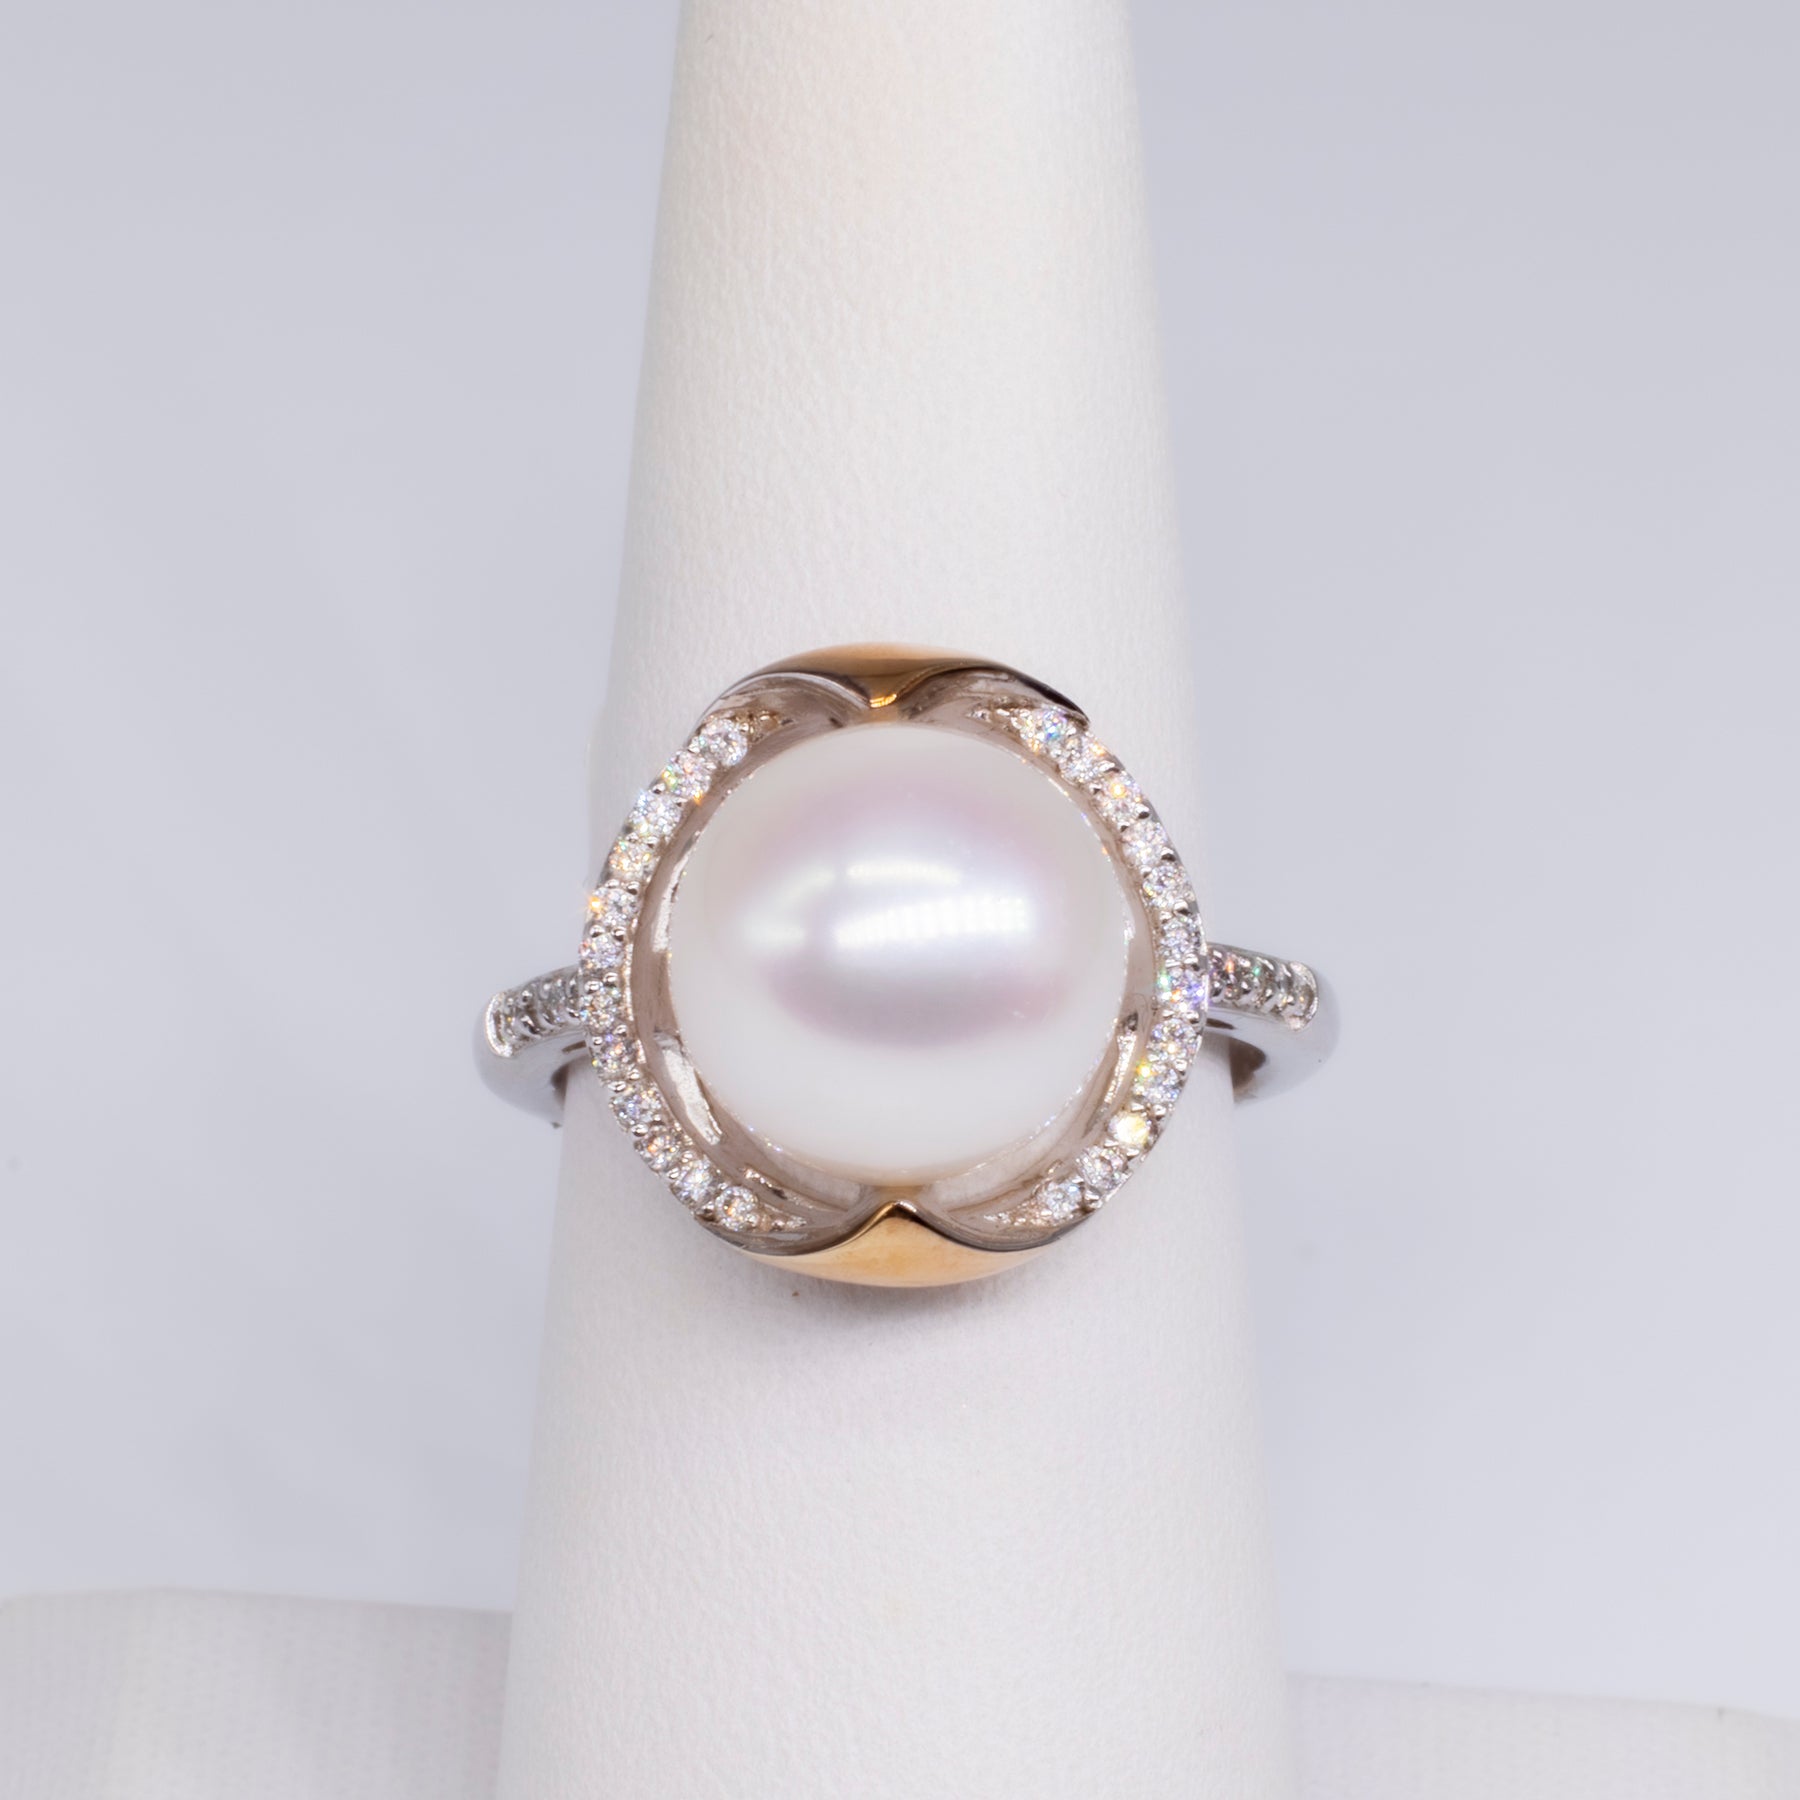 12mm White Round Pearl Ring w Simulate Diamond Accent 18k Gold Plated  Gorgeous | eBay